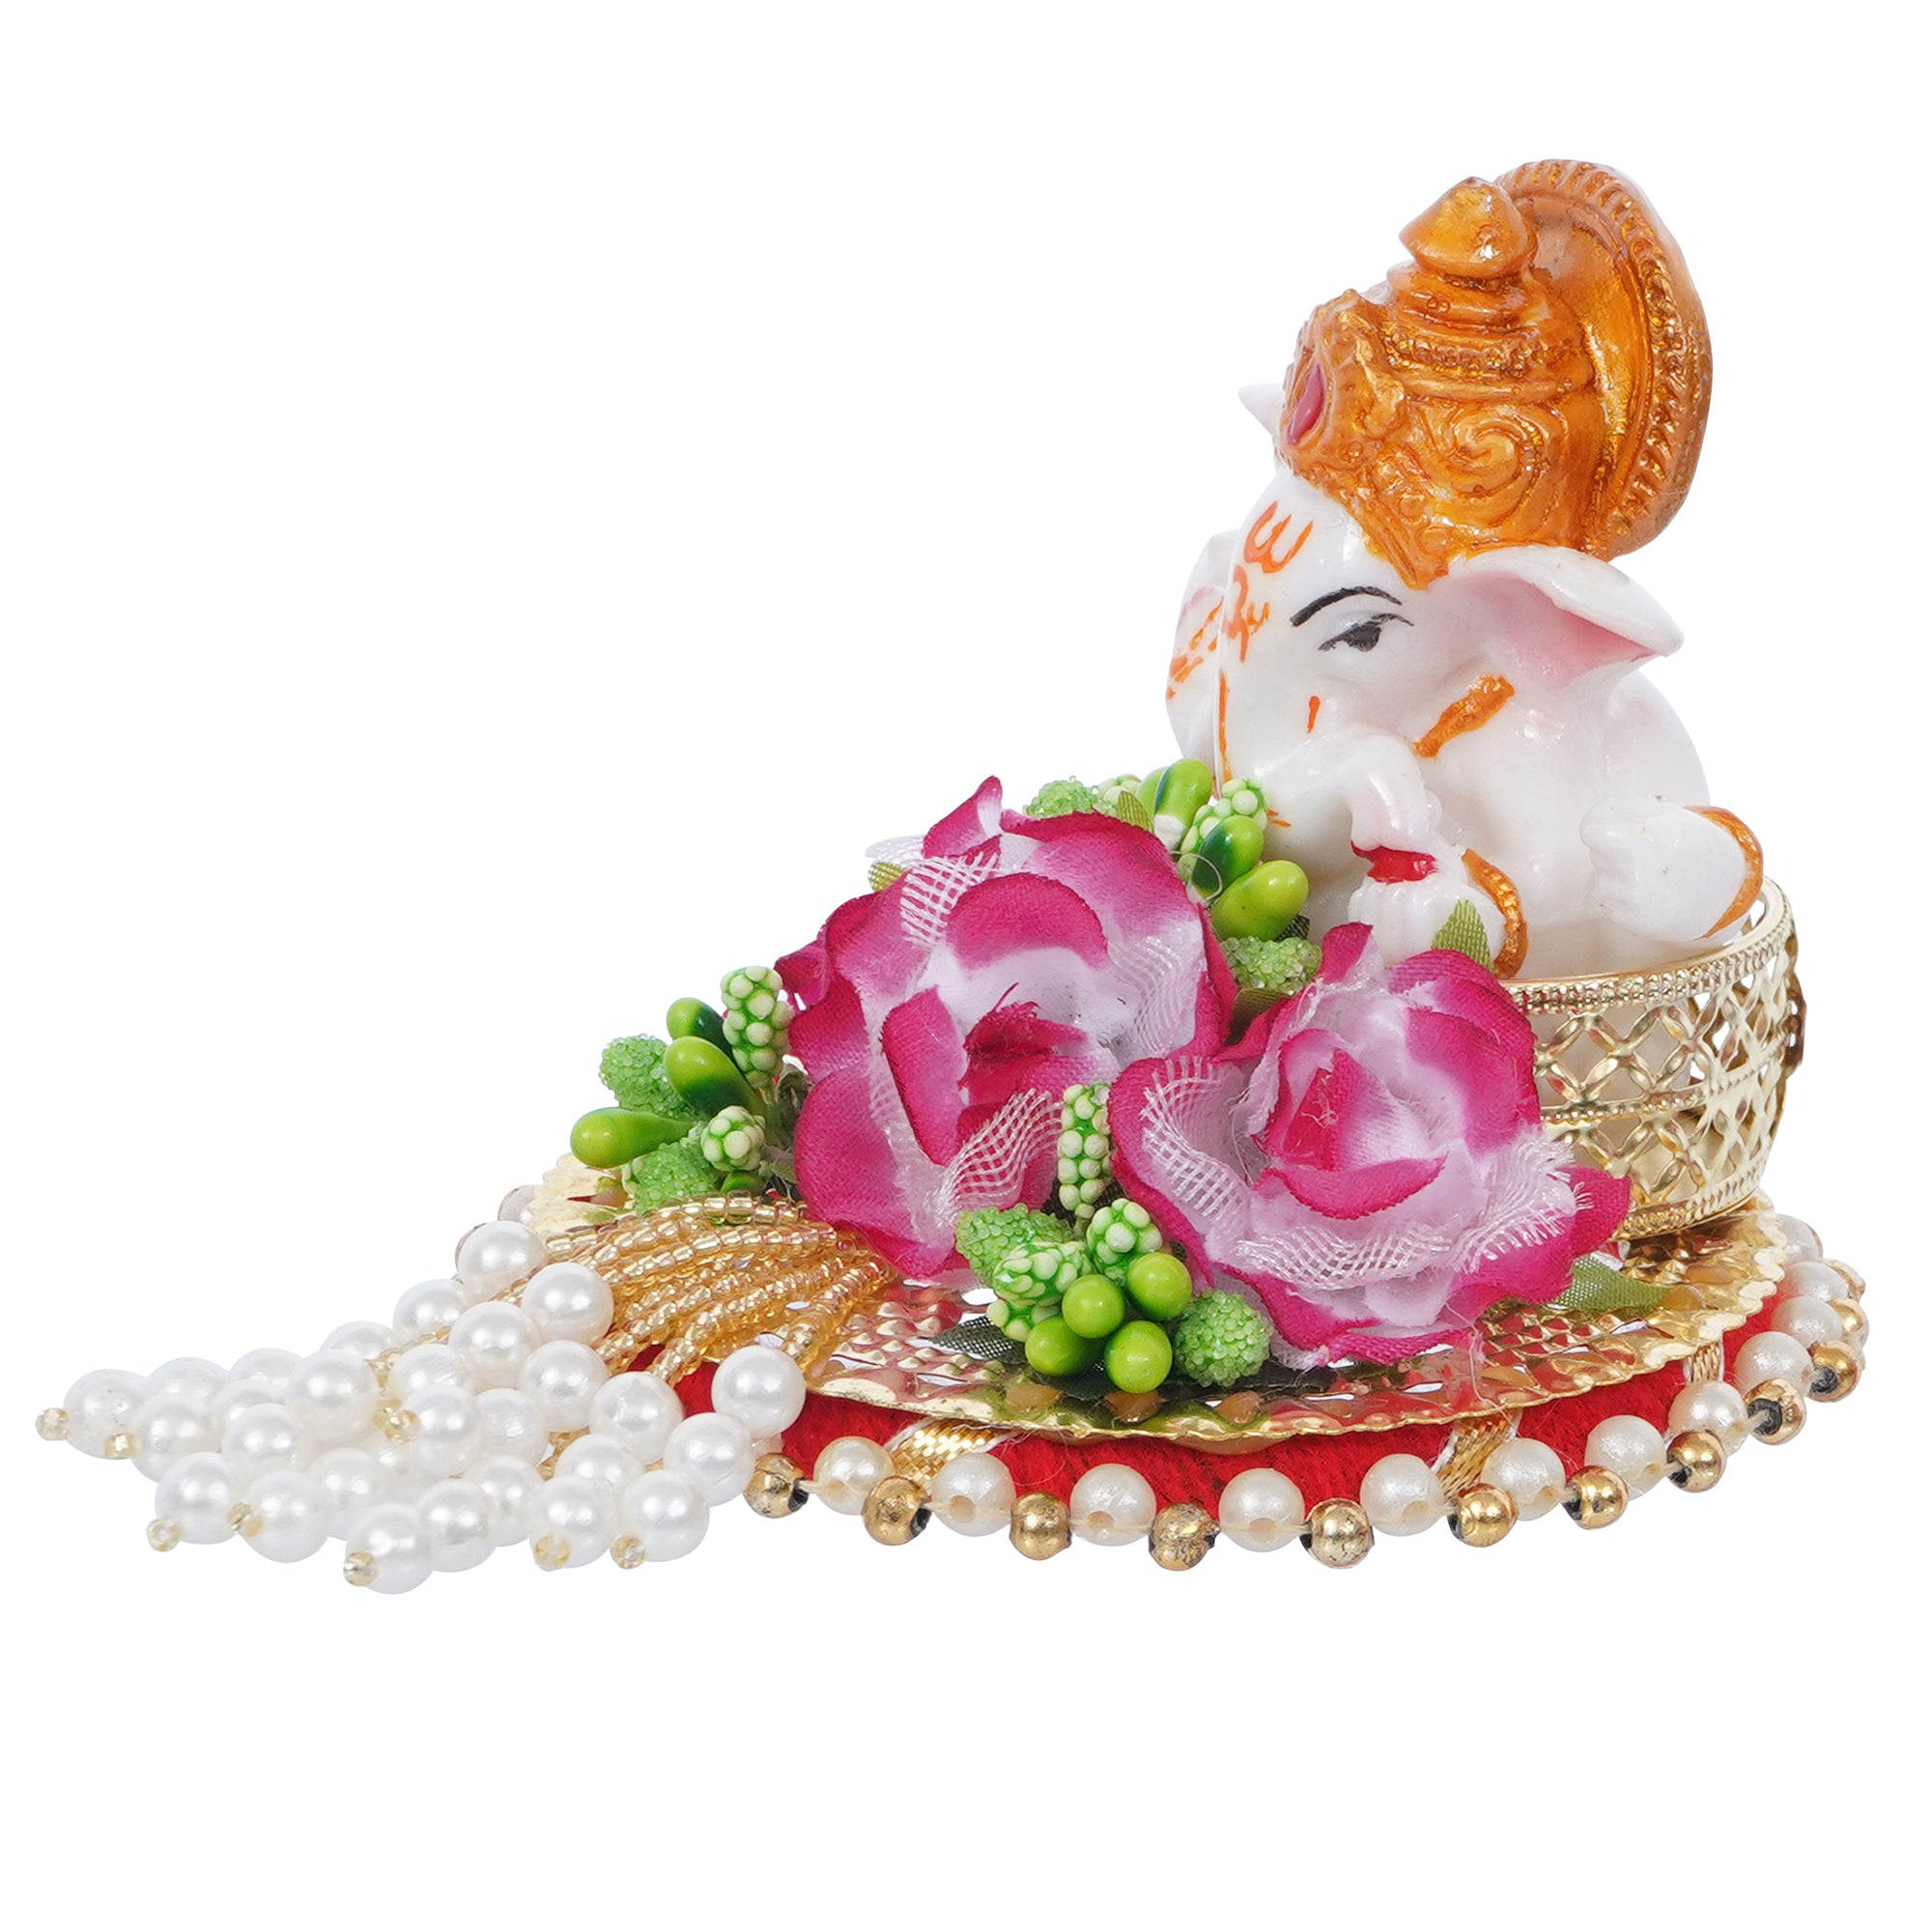 Lord Ganesha Idol On Decorative Handcrafted Colorful Flowers Plate 5